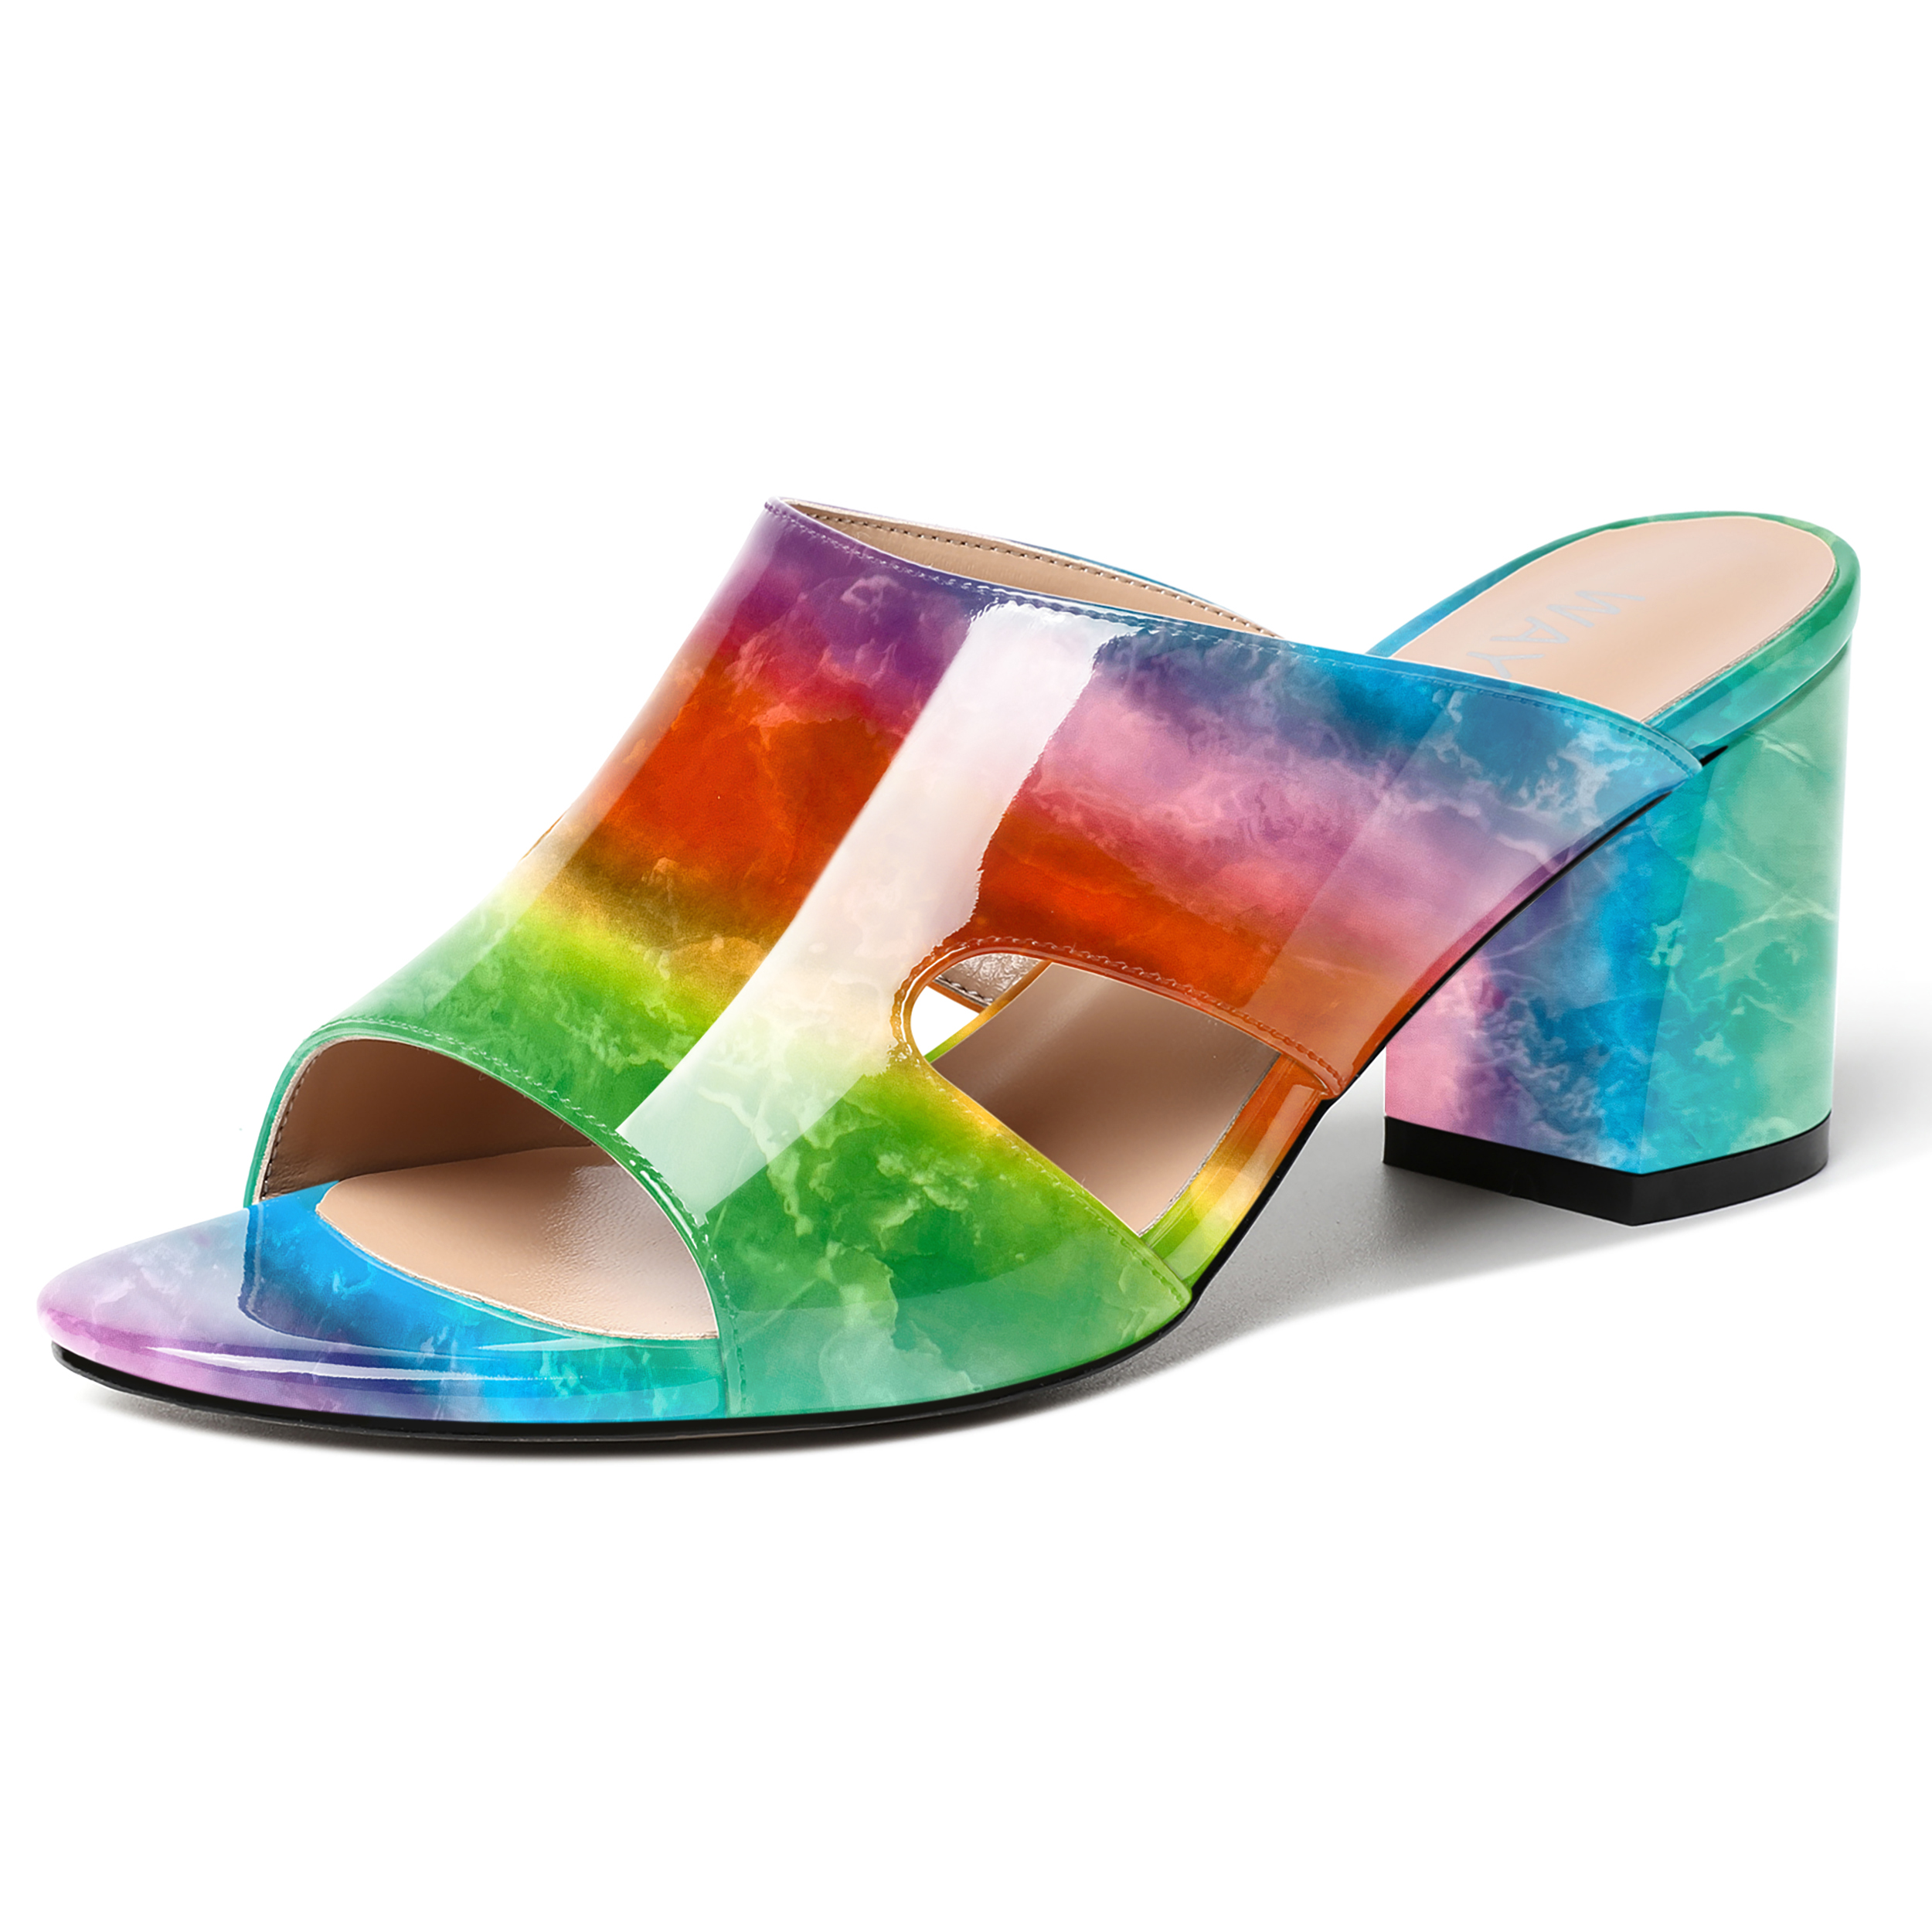 Rayna Slip On Cut Out Block Heeled Sandals